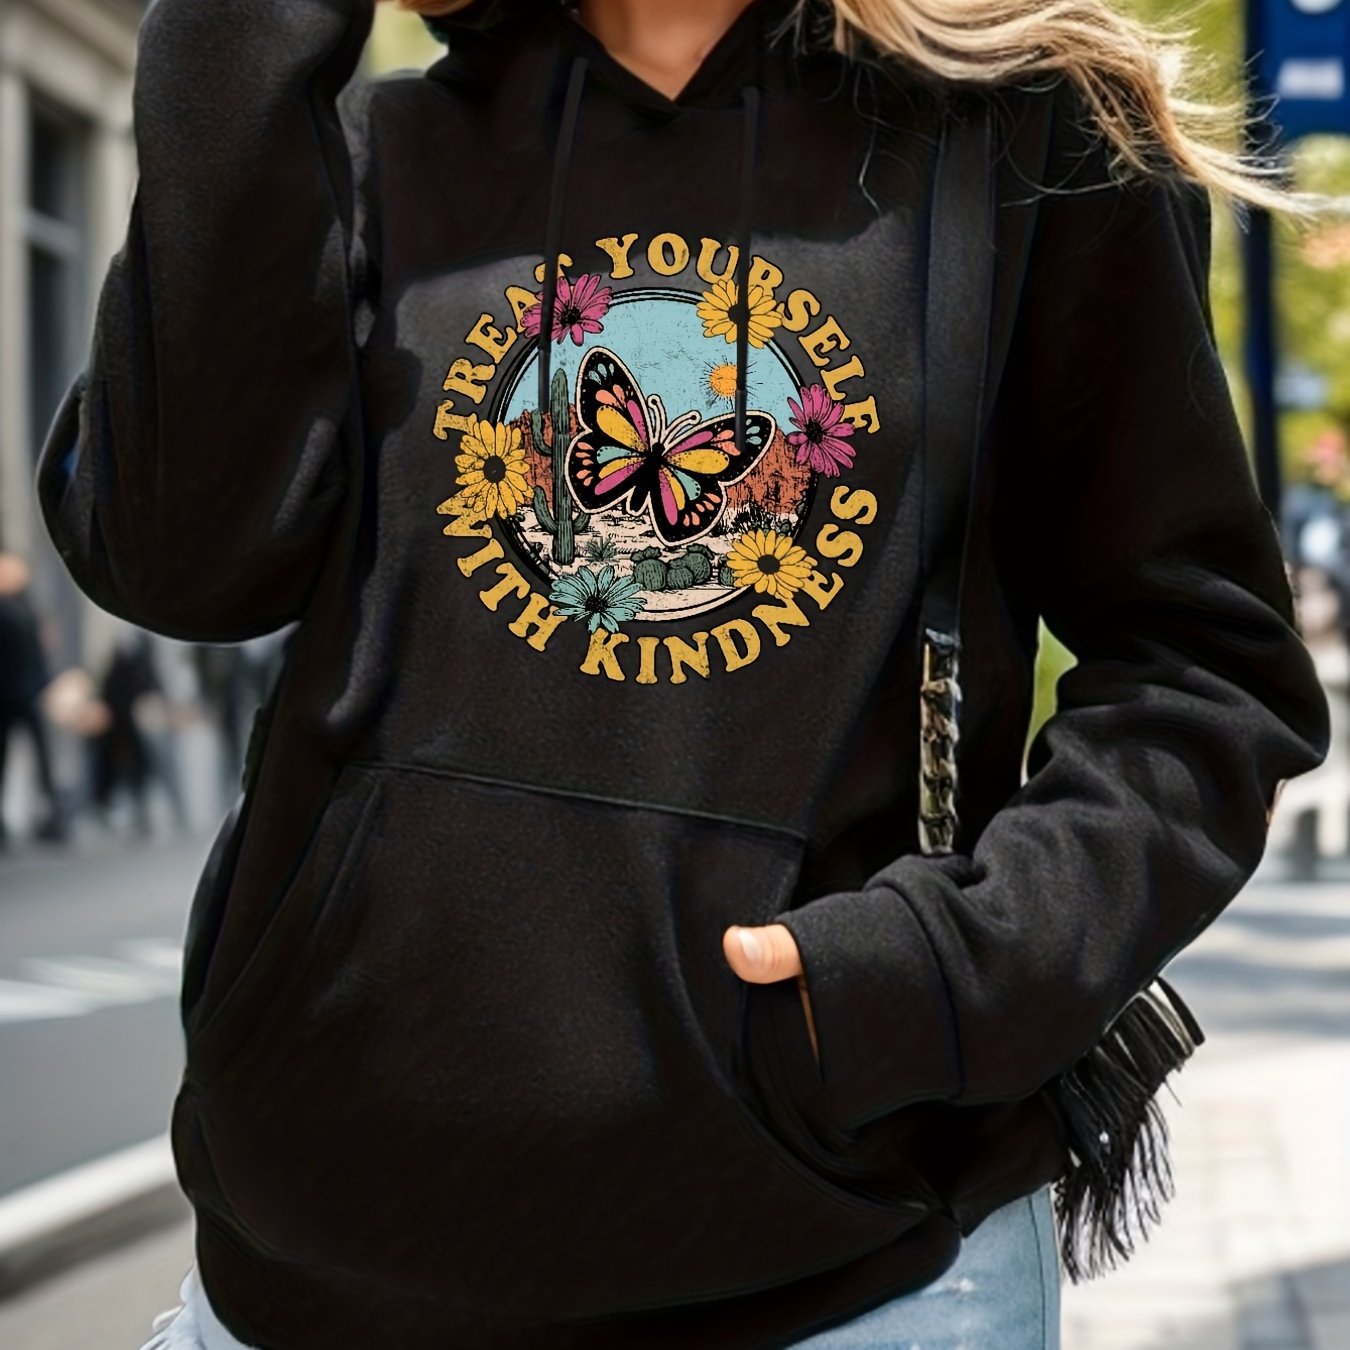 Believe In Yourself Plus Size Women's Christian Pullover Hooded Sweatshirt claimedbygoddesigns